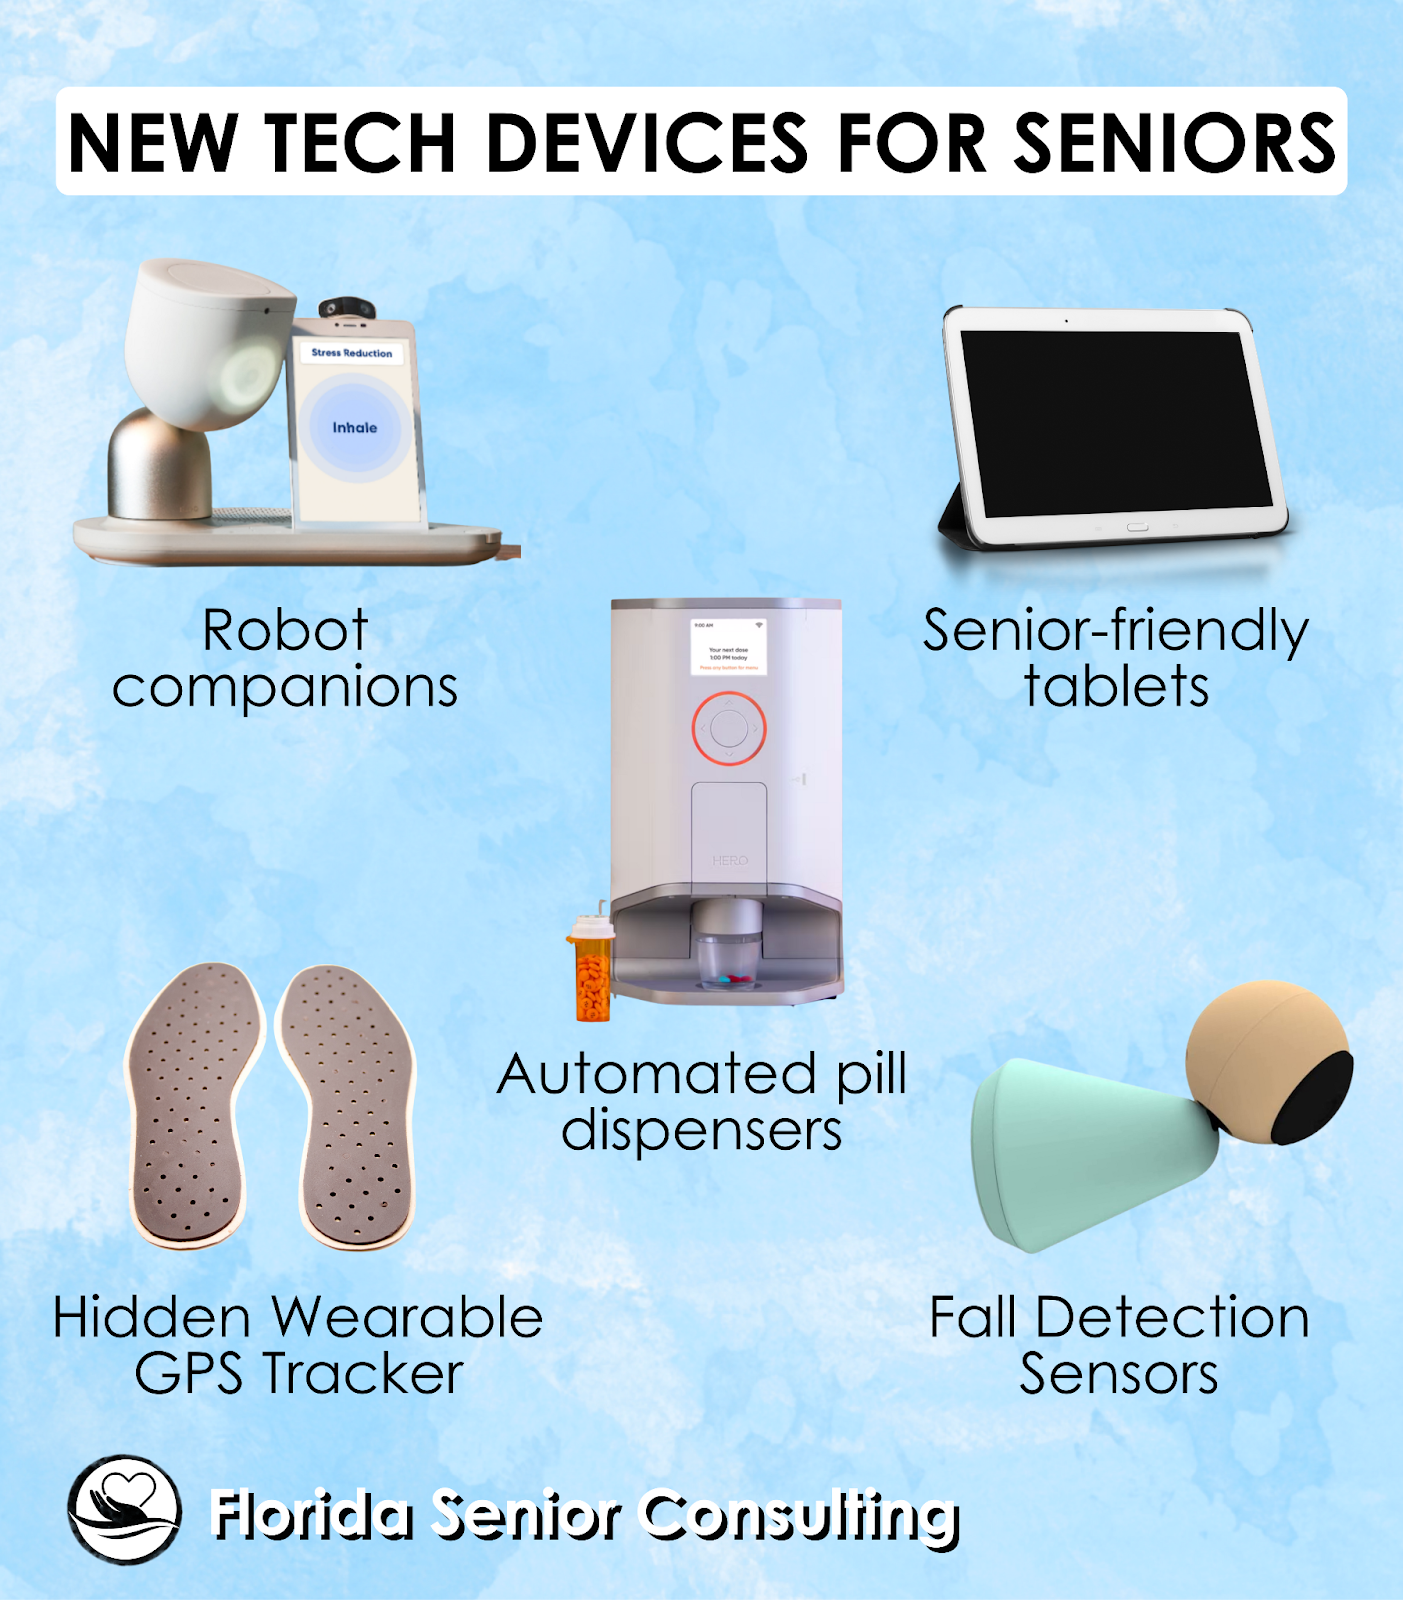 Articles - 5 New Tech Devices for Seniors